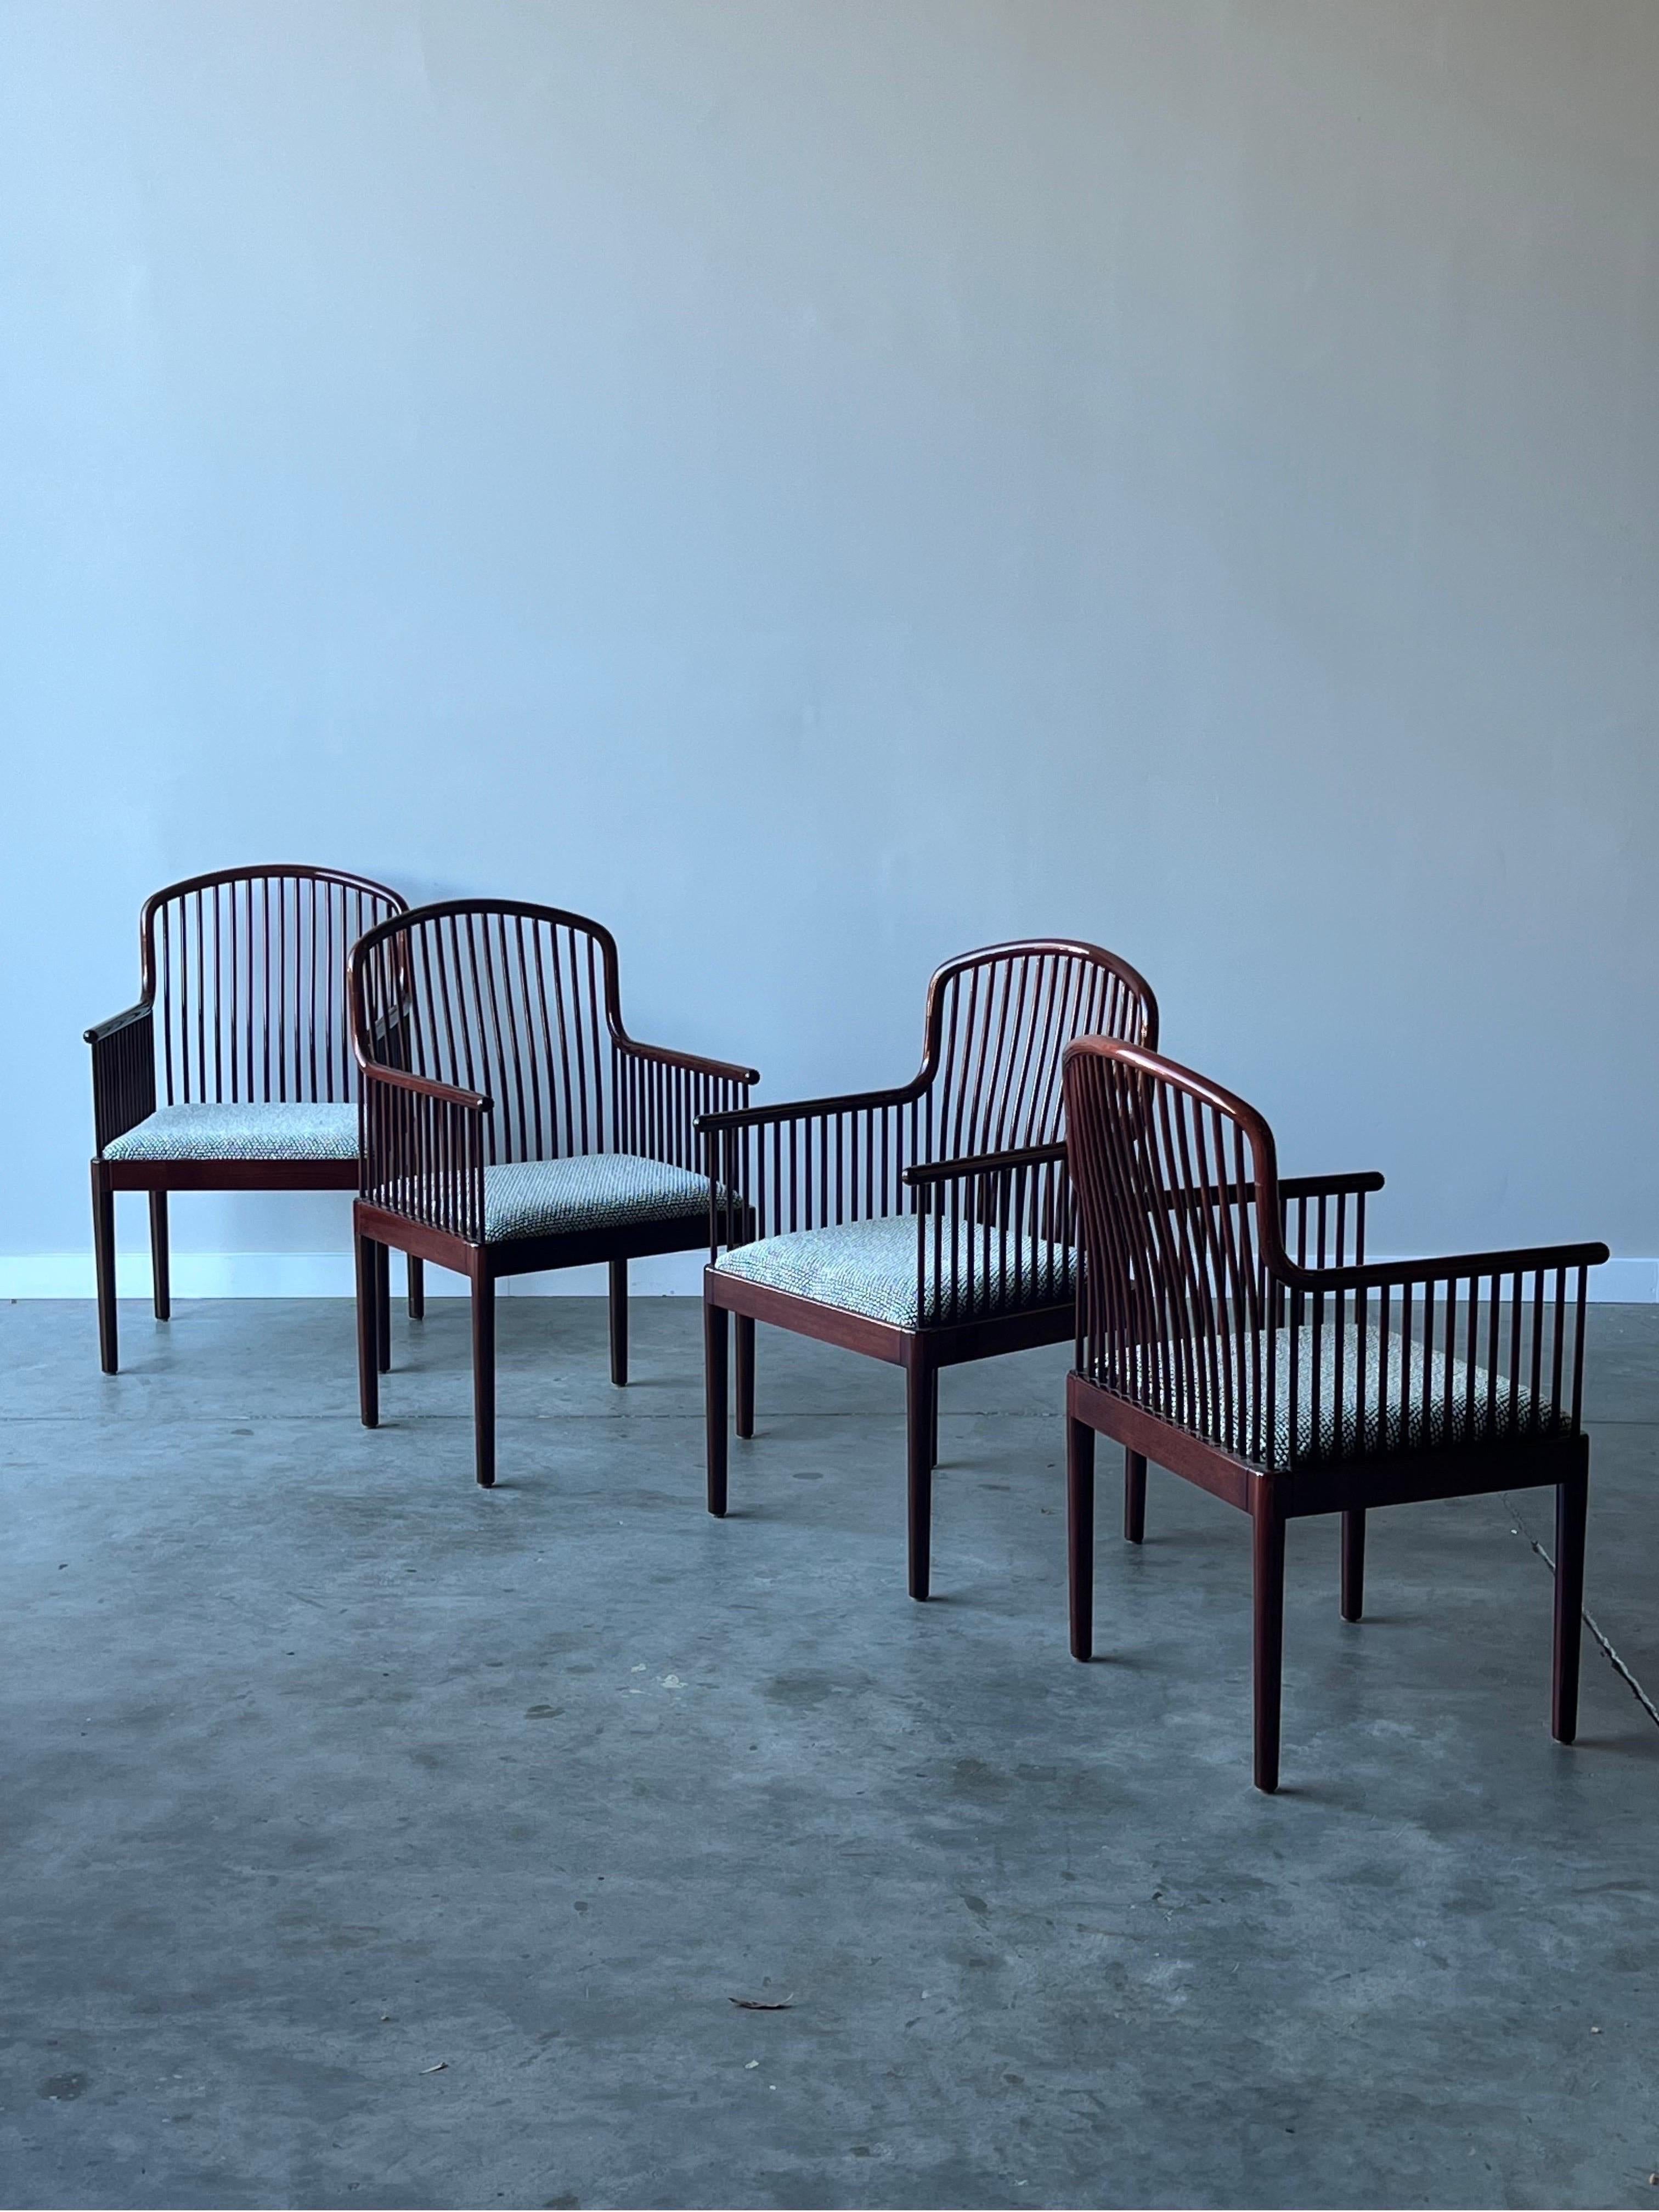 Vintage armchairs designed by Davis Allen for Stendig, circa 1980s. The set of four armchairs are made from rosewood with a glossy finish. Spindles wrap along the arms and backs of the chairs adding depth and dimension to the chairs. Quite a